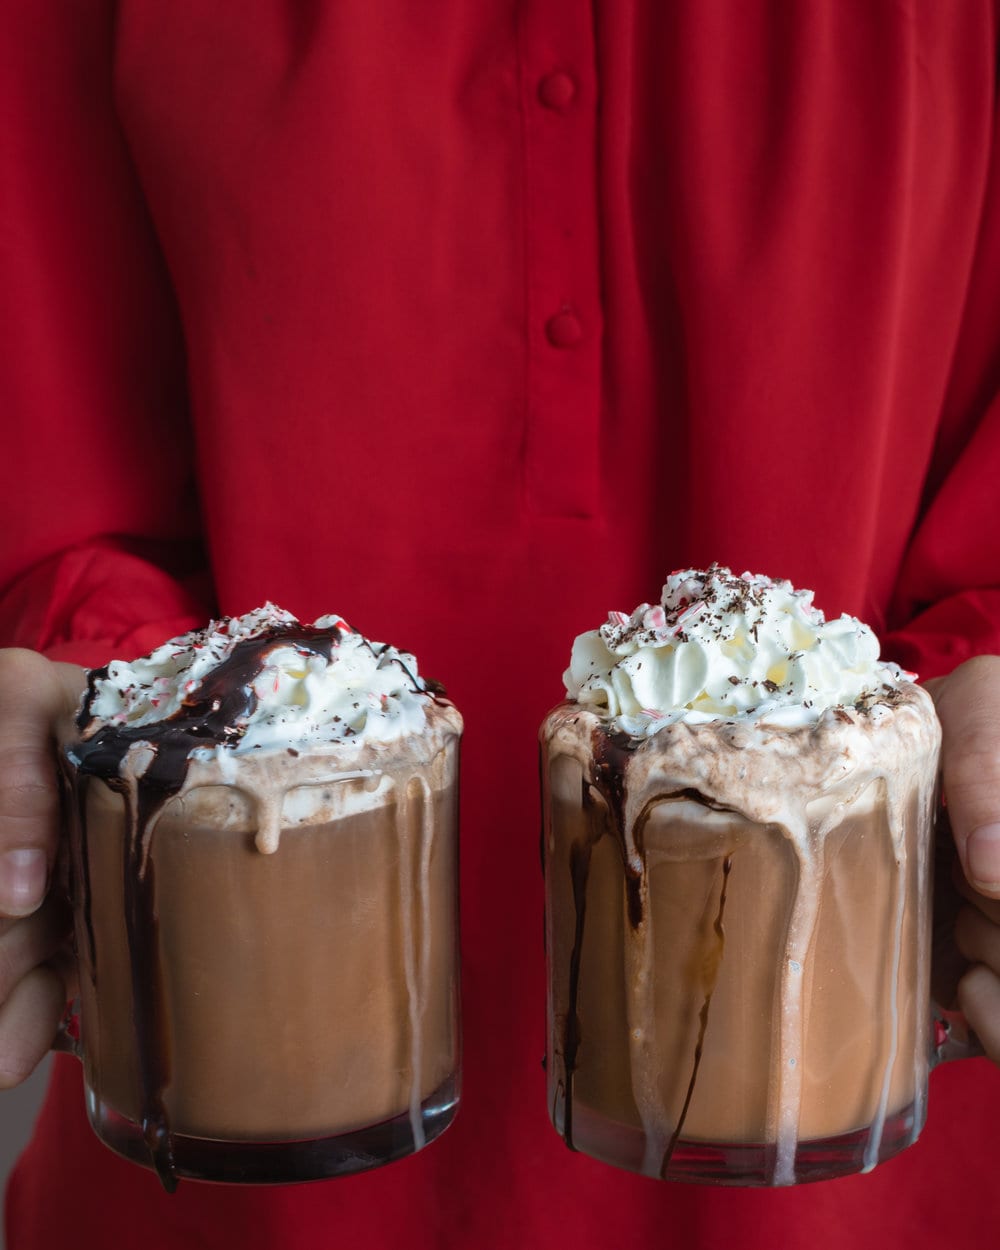 Person wearing red holding two mugs filled with peppermint mocha and whipped cream.